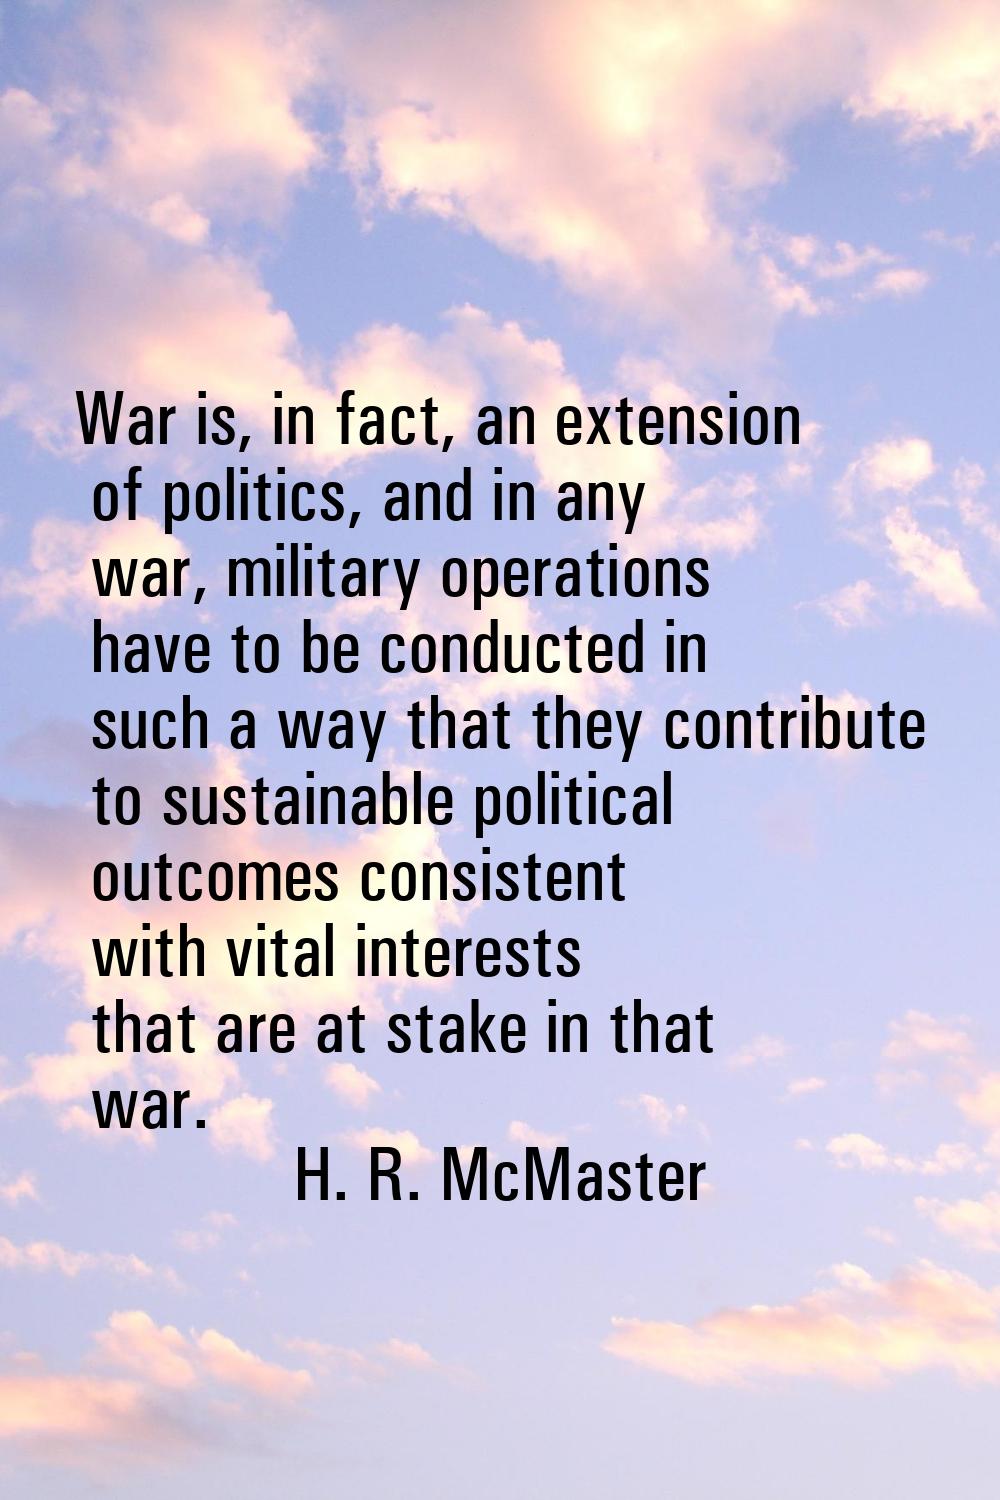 War is, in fact, an extension of politics, and in any war, military operations have to be conducted